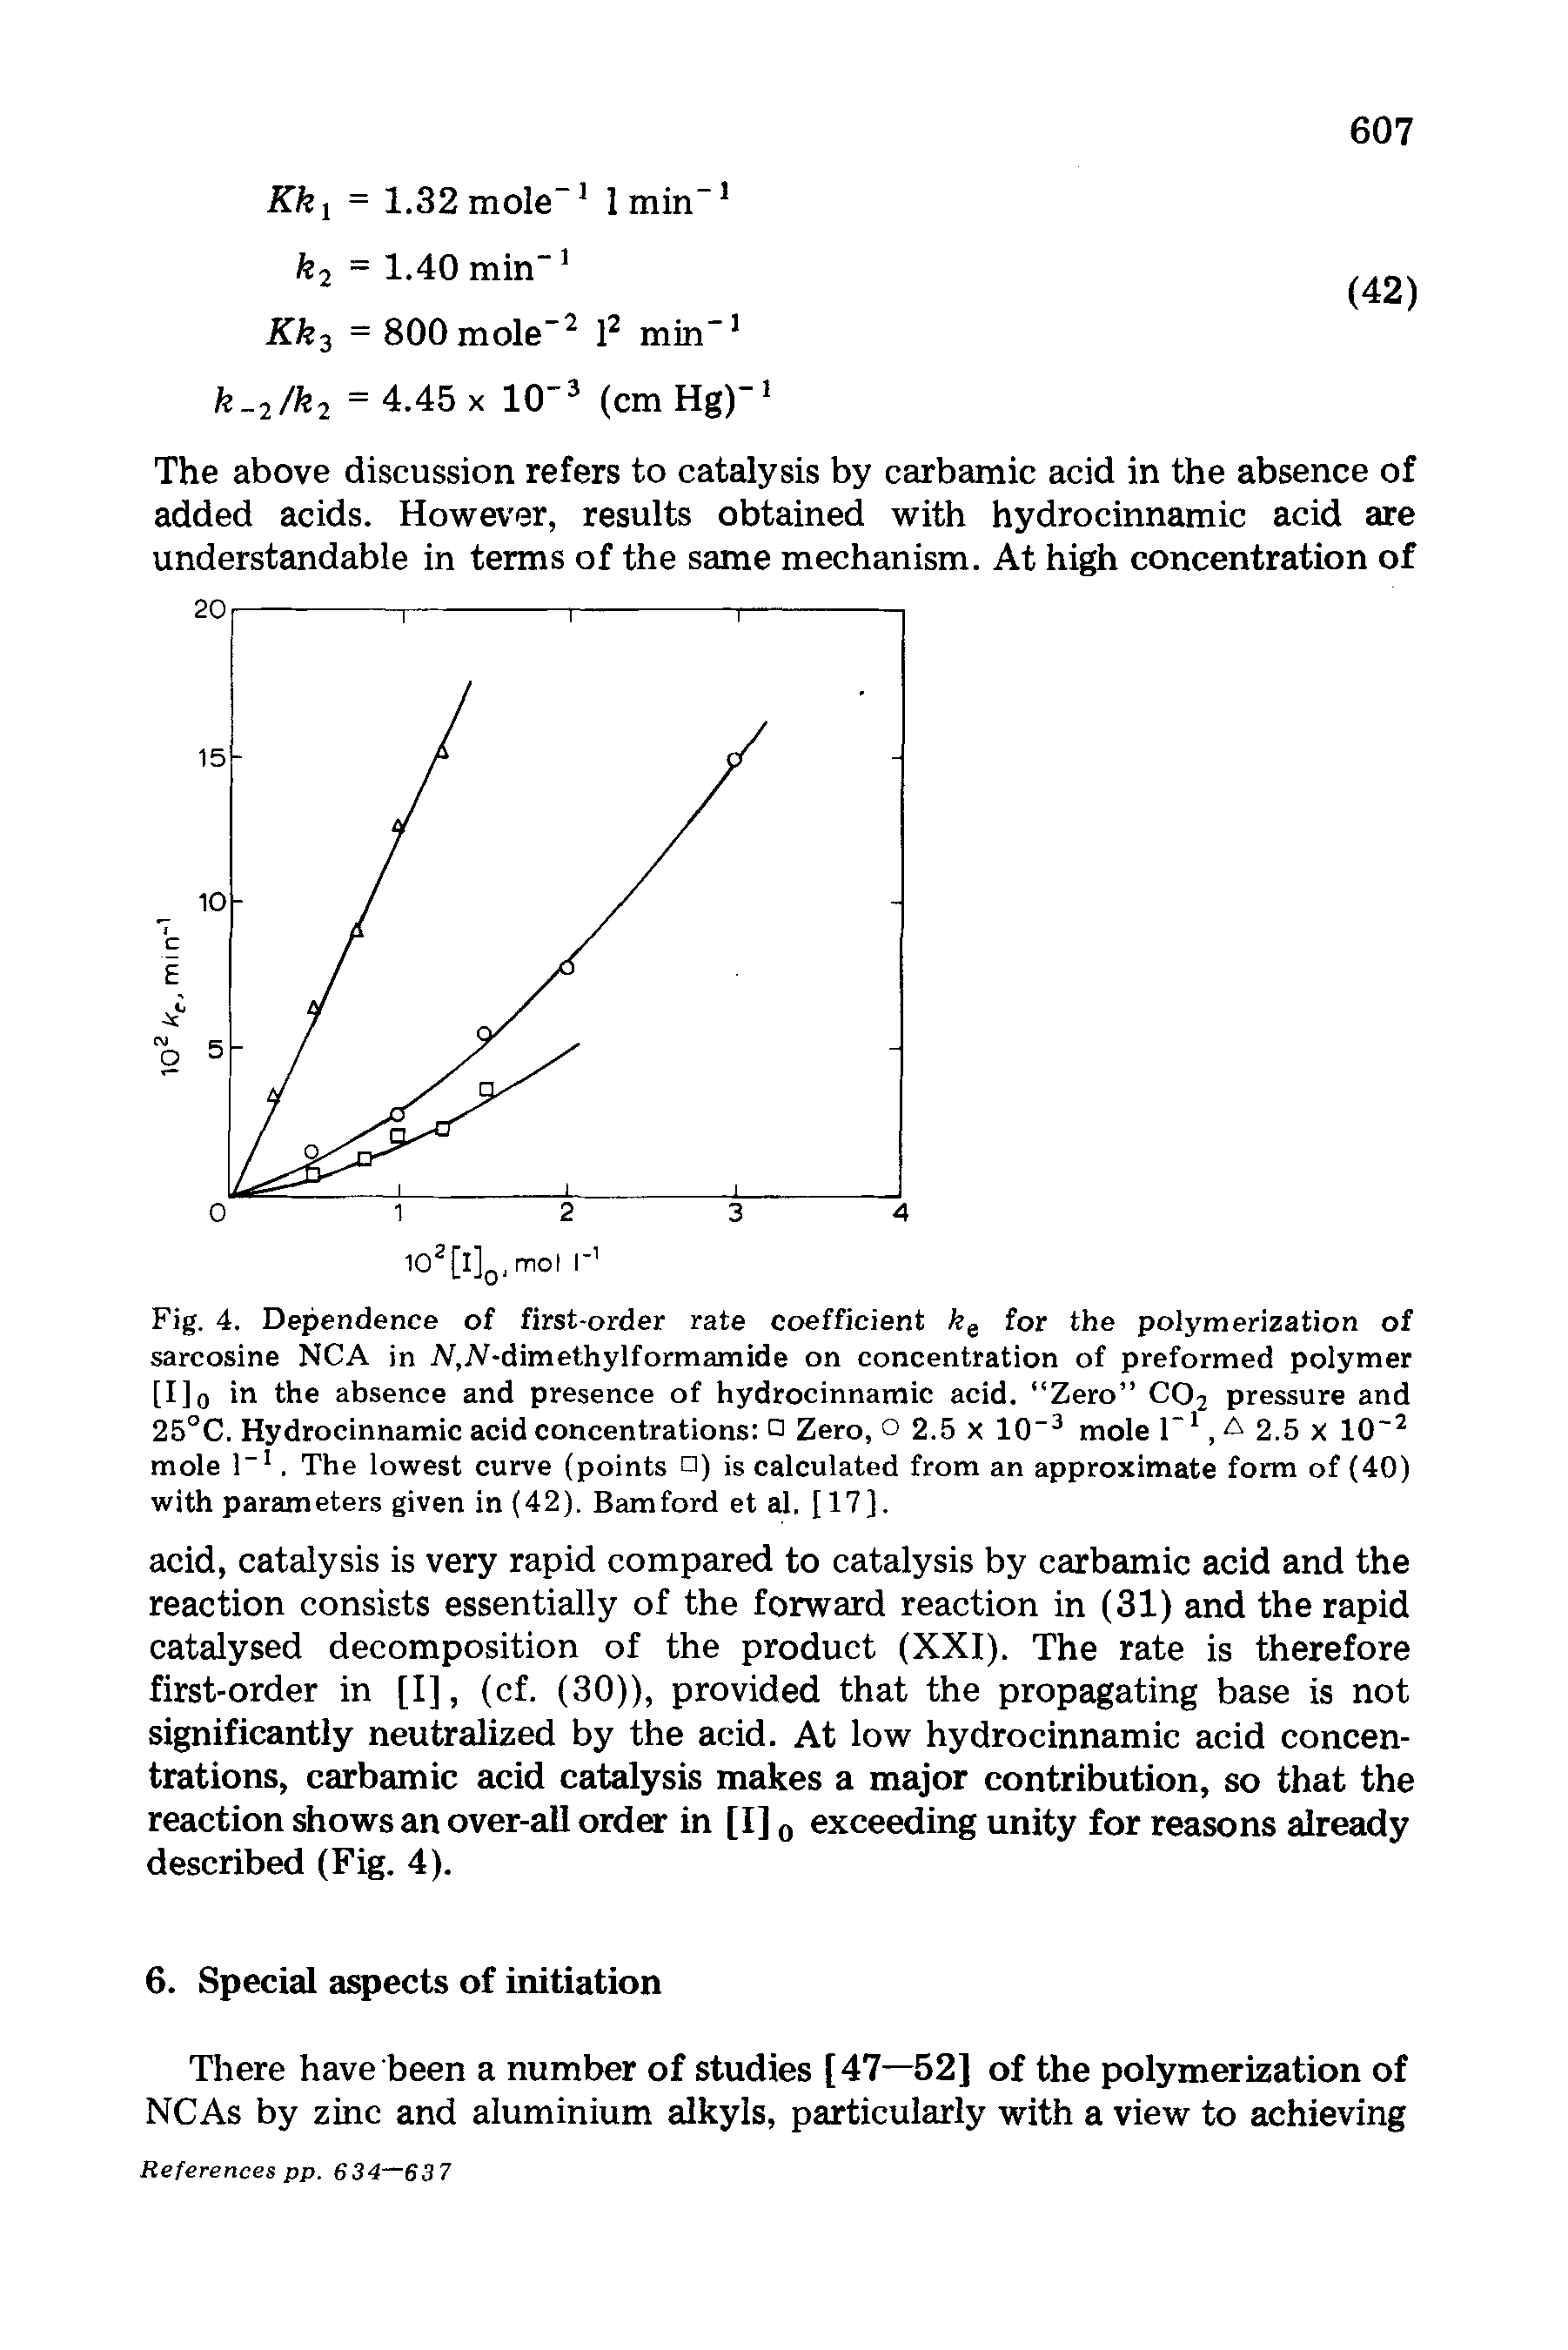 Fig. 4. Dependence of first-order rate coefficient for the polymerization of sarcosine NCA in AT,Al-dimethylformamide on concentration of preformed polymer [I]o in the absence and presence of hydrocinnamic acid. Zero CO2 pressure and 25°C. Hydrocinnamic acid concentrations Zero, o 2.5 x 10 mole 1" 2.5 x 10 ...